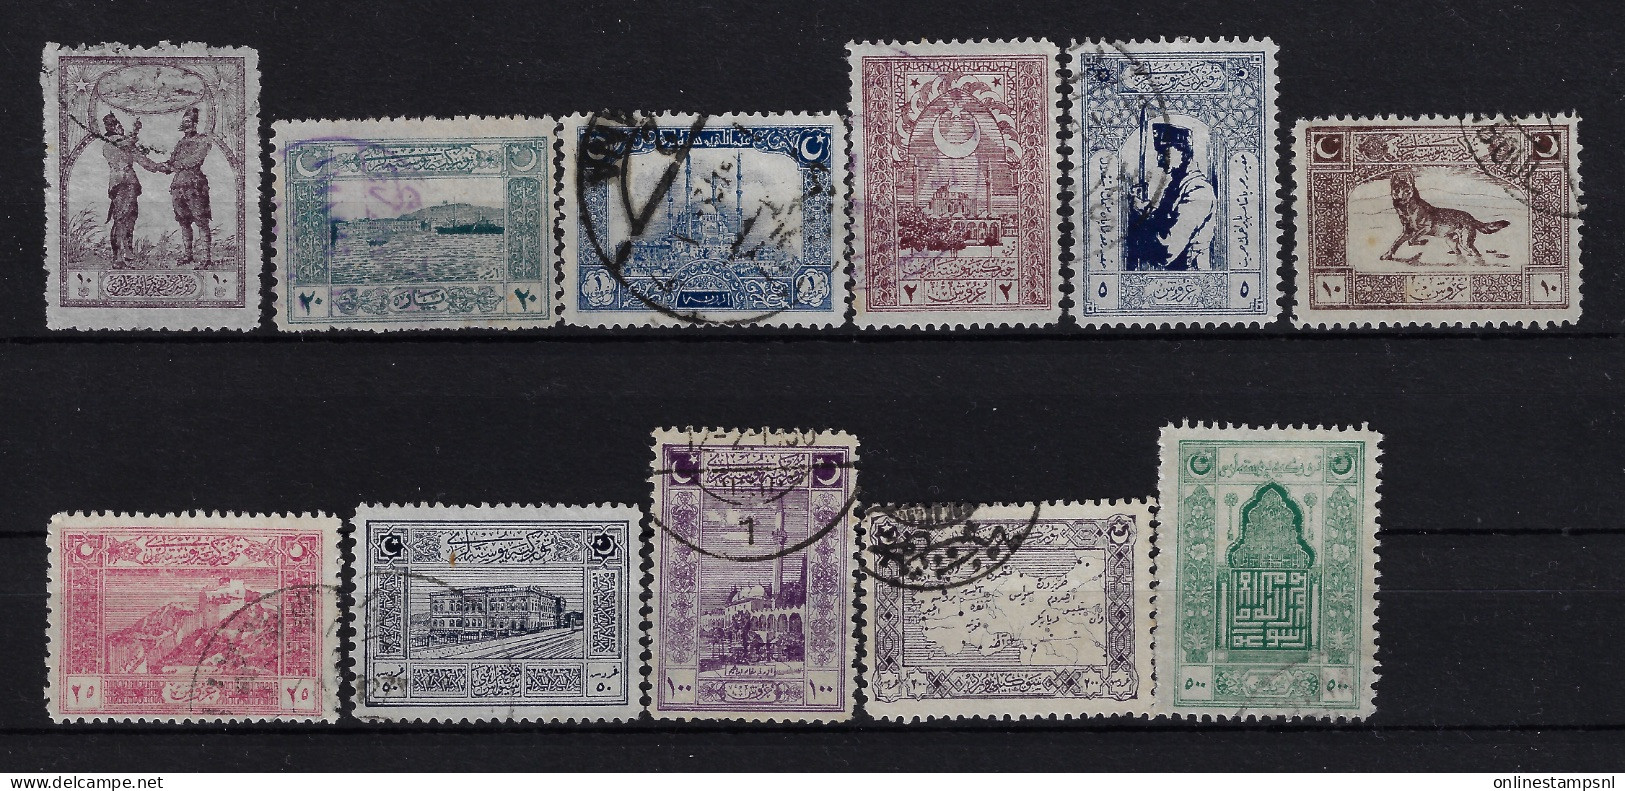 Turkey: Mi 767 - 778  Isf  1079 - 1090 1922 Oblitéré/cancelled/used 1x 50 Piasters - Used Stamps